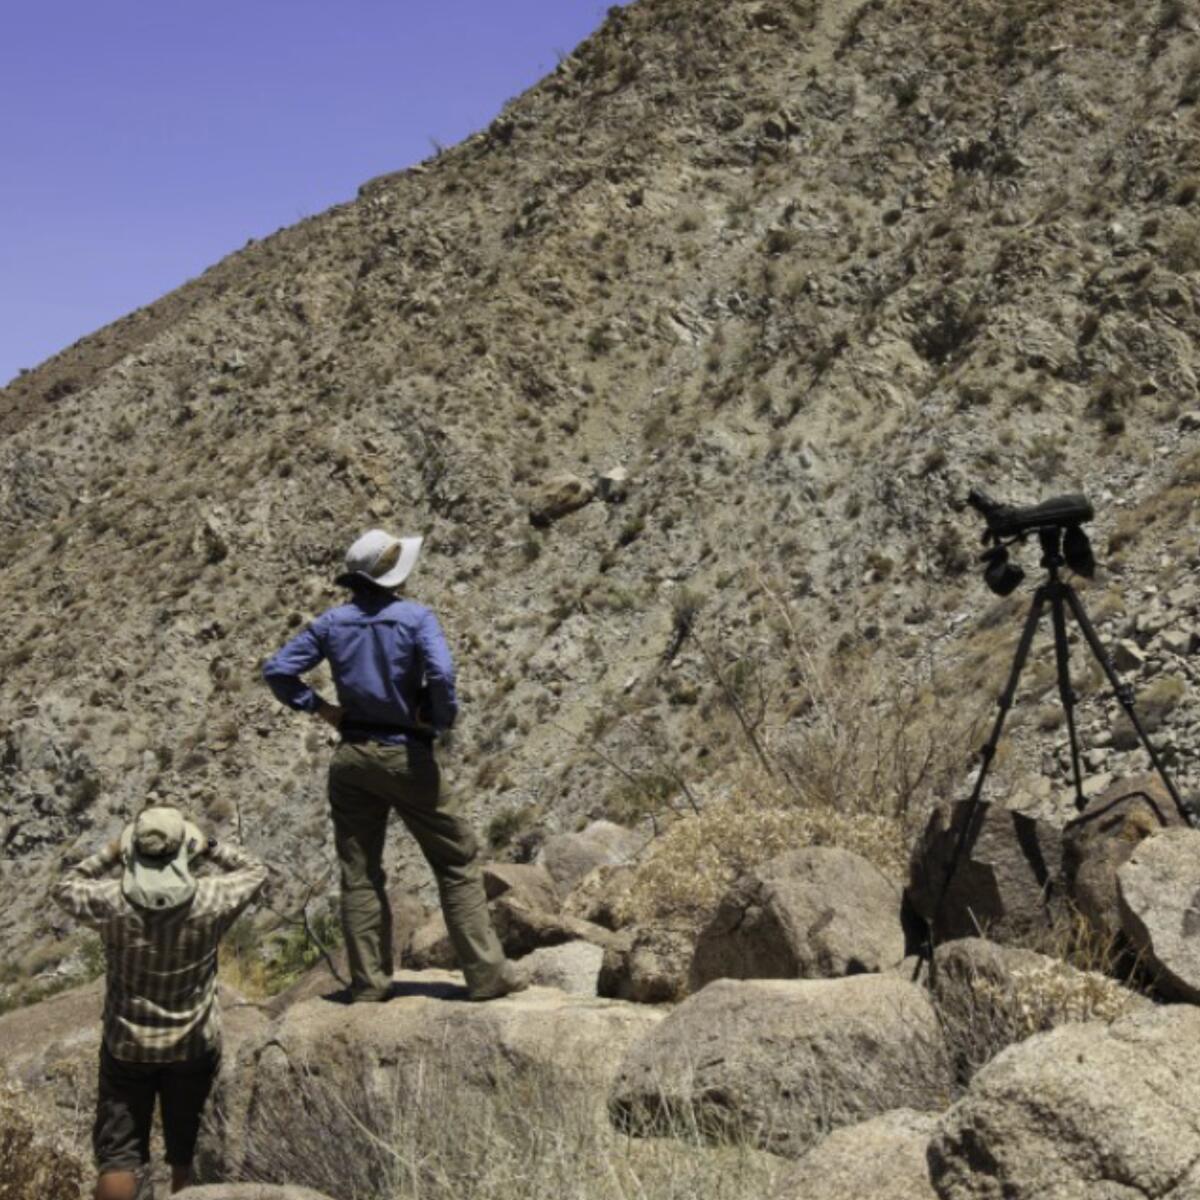 Observers look for sheep in the Lower Hellhole in Anza-Borrego Desert State Park. 